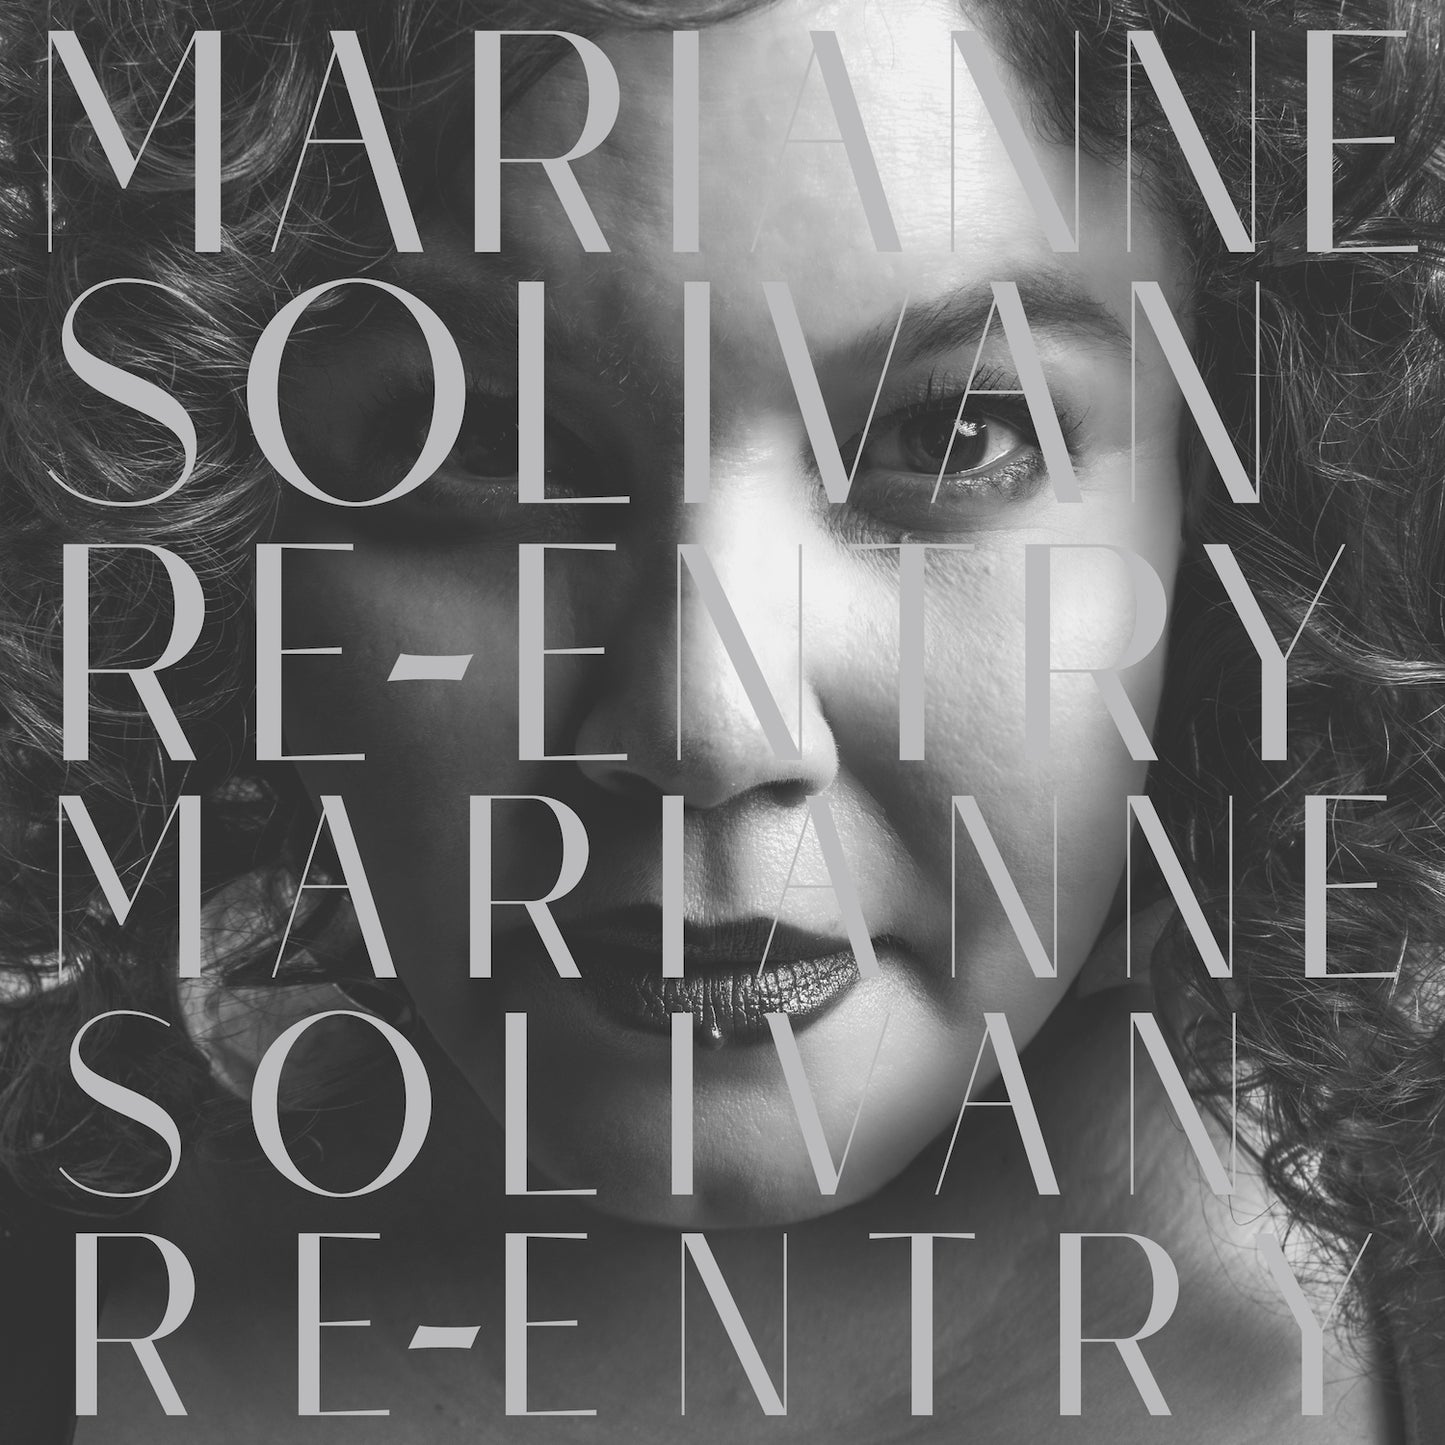 Marianne Solivan - Re-Entry (CD)